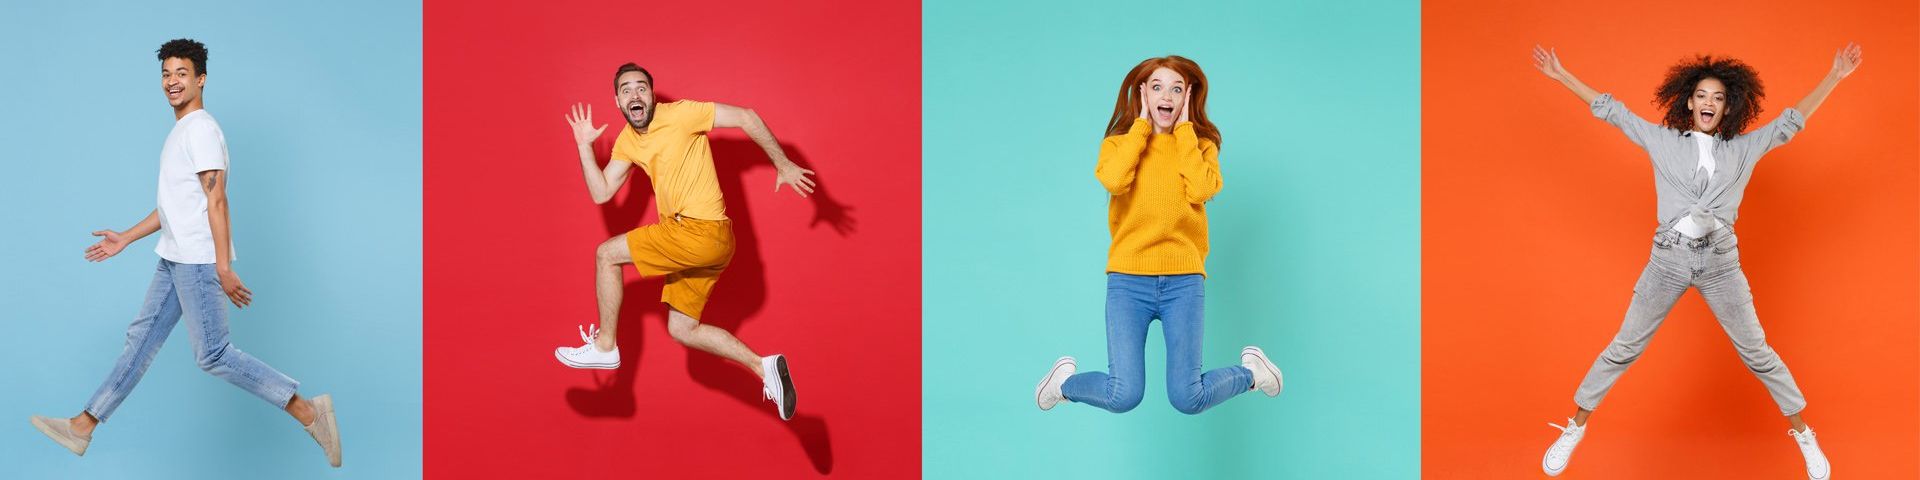 Four people photographed separately on coloured backgrounds. Left to right: A man in a white t-shirt and blue jeans, turned to one side and jumping in mid-air with legs apart against a blue background. A man in orange shorts, a yellow t-shirt and white sneakers, posing as though running while pulling a silly face, against a red background. A woman in a yellow jumper, blue jeans and white sneakers jumping with her hands against her face on a turquoise background and a woman in a grey shirt, grey jeans and white sneakers, star-jumping against an orange background.